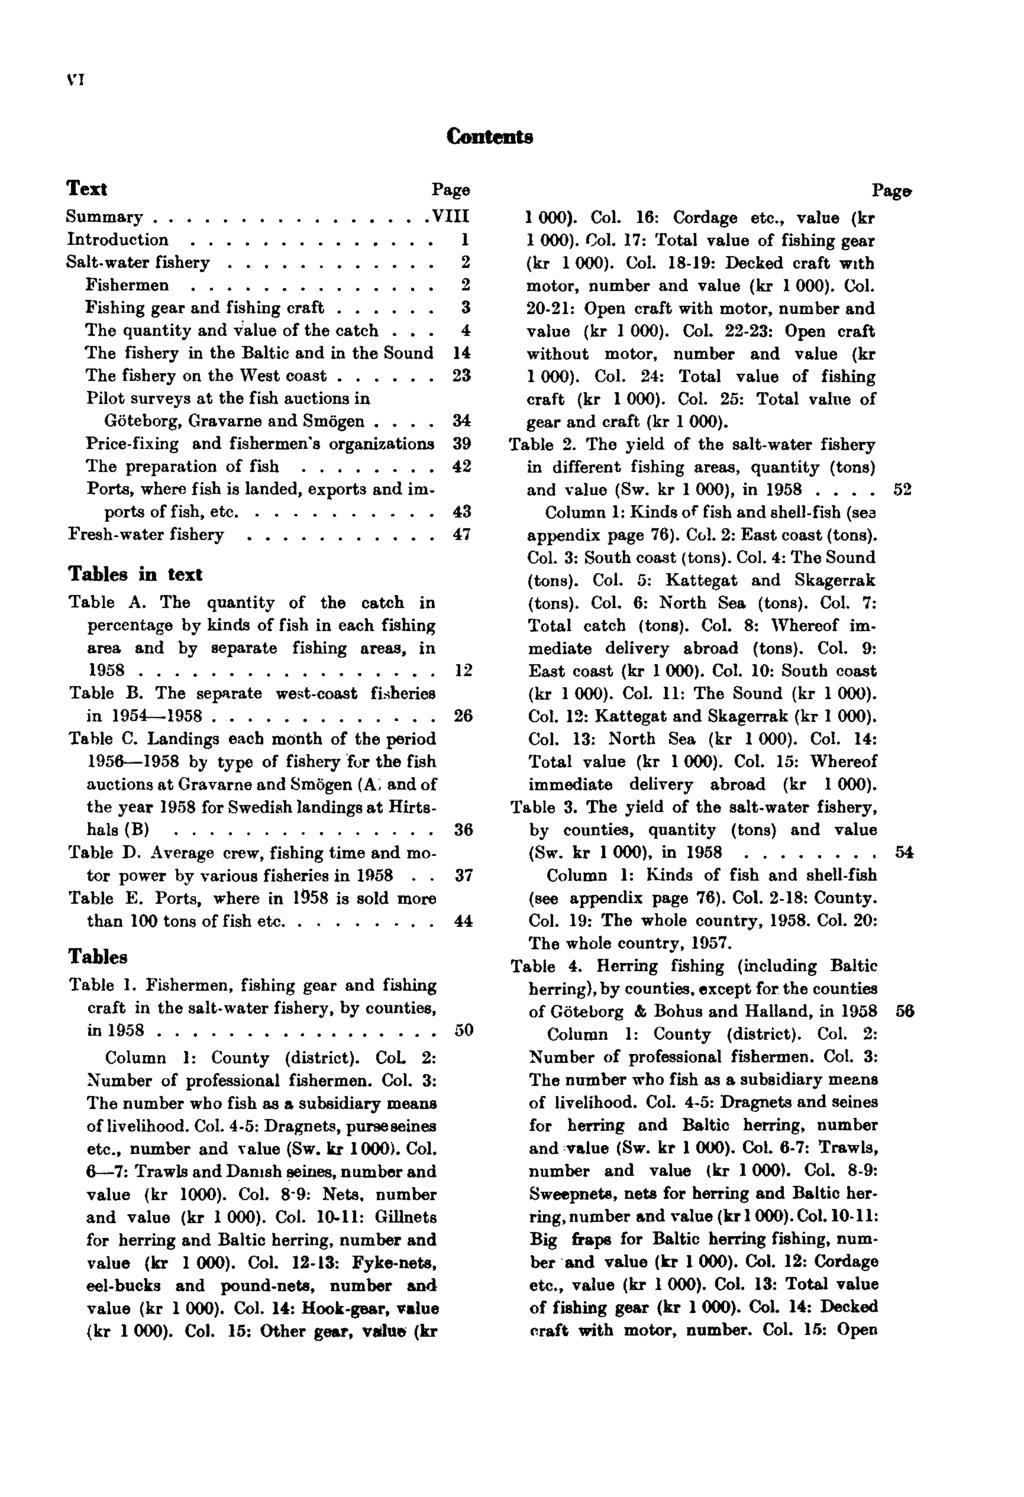 VI Contents Text Page Summary VIII Introduction 1 Salt-water fishery 2 Fishermen 2 Fishing gear and fishing craft 3 The quantity and value of the catch 4 The fishery in the Baltic and in the Sound 14